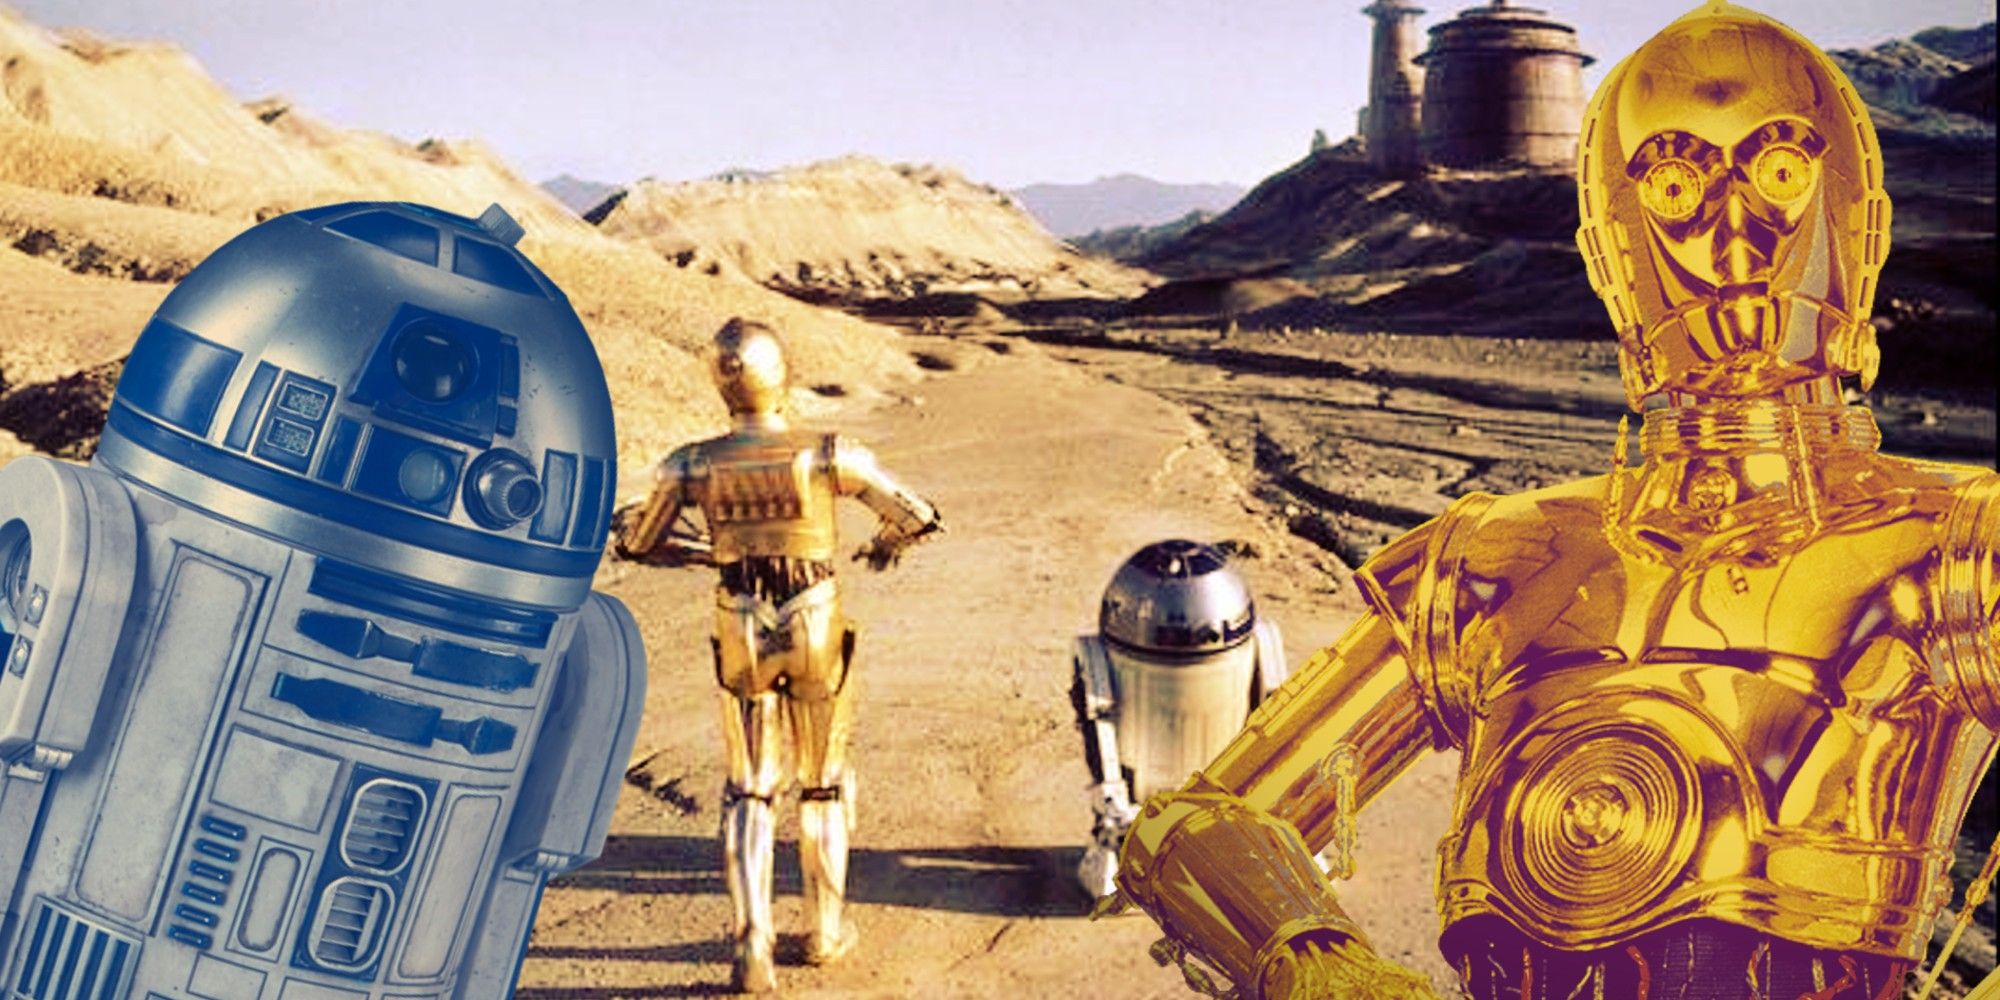 R2-D2 And C-3PO Will Star In A Droid Story